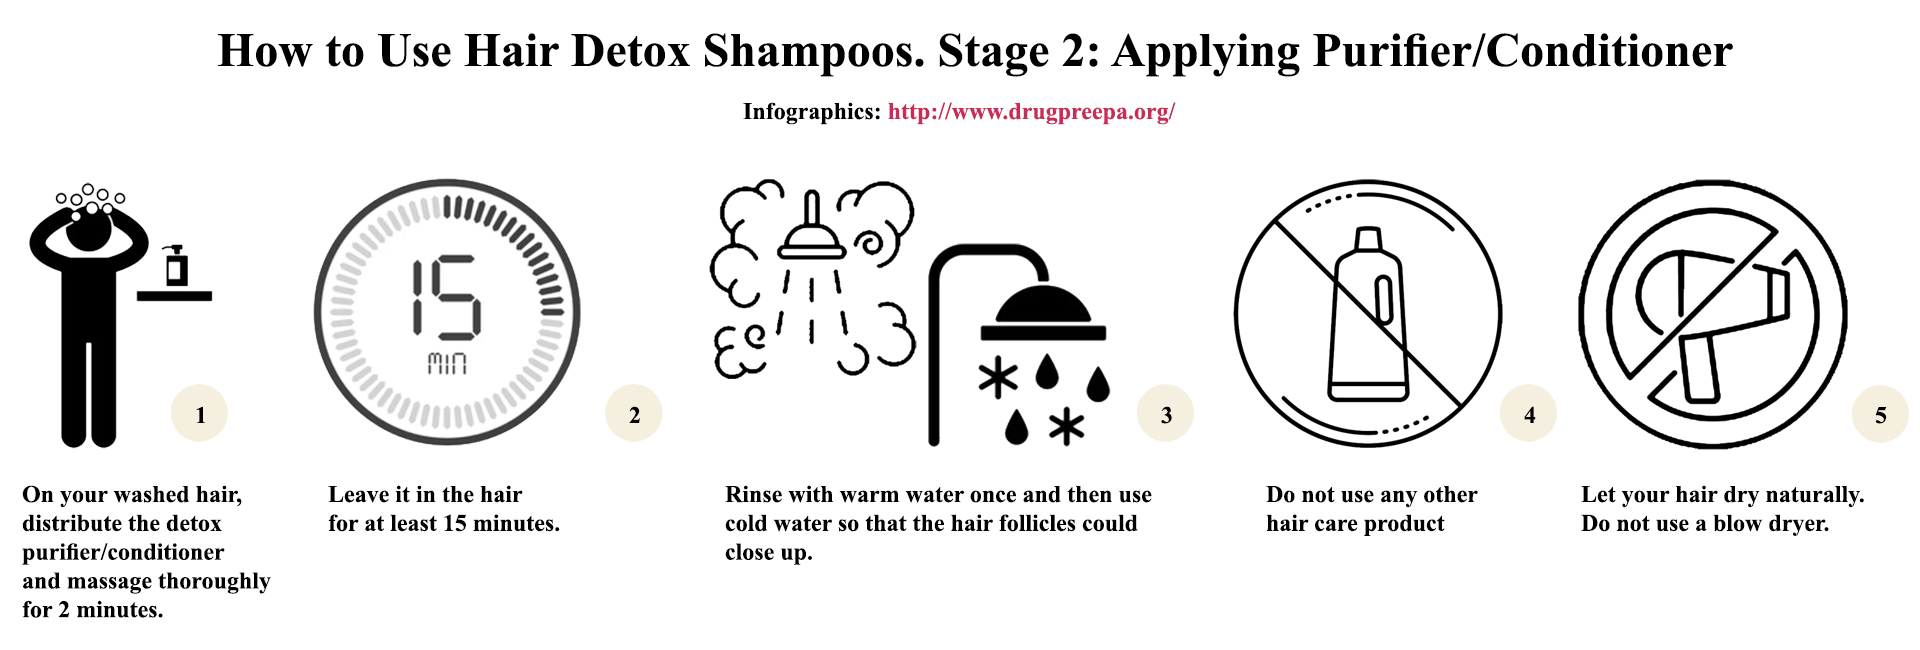 how to use hair detox shampoos applying purifier infographics